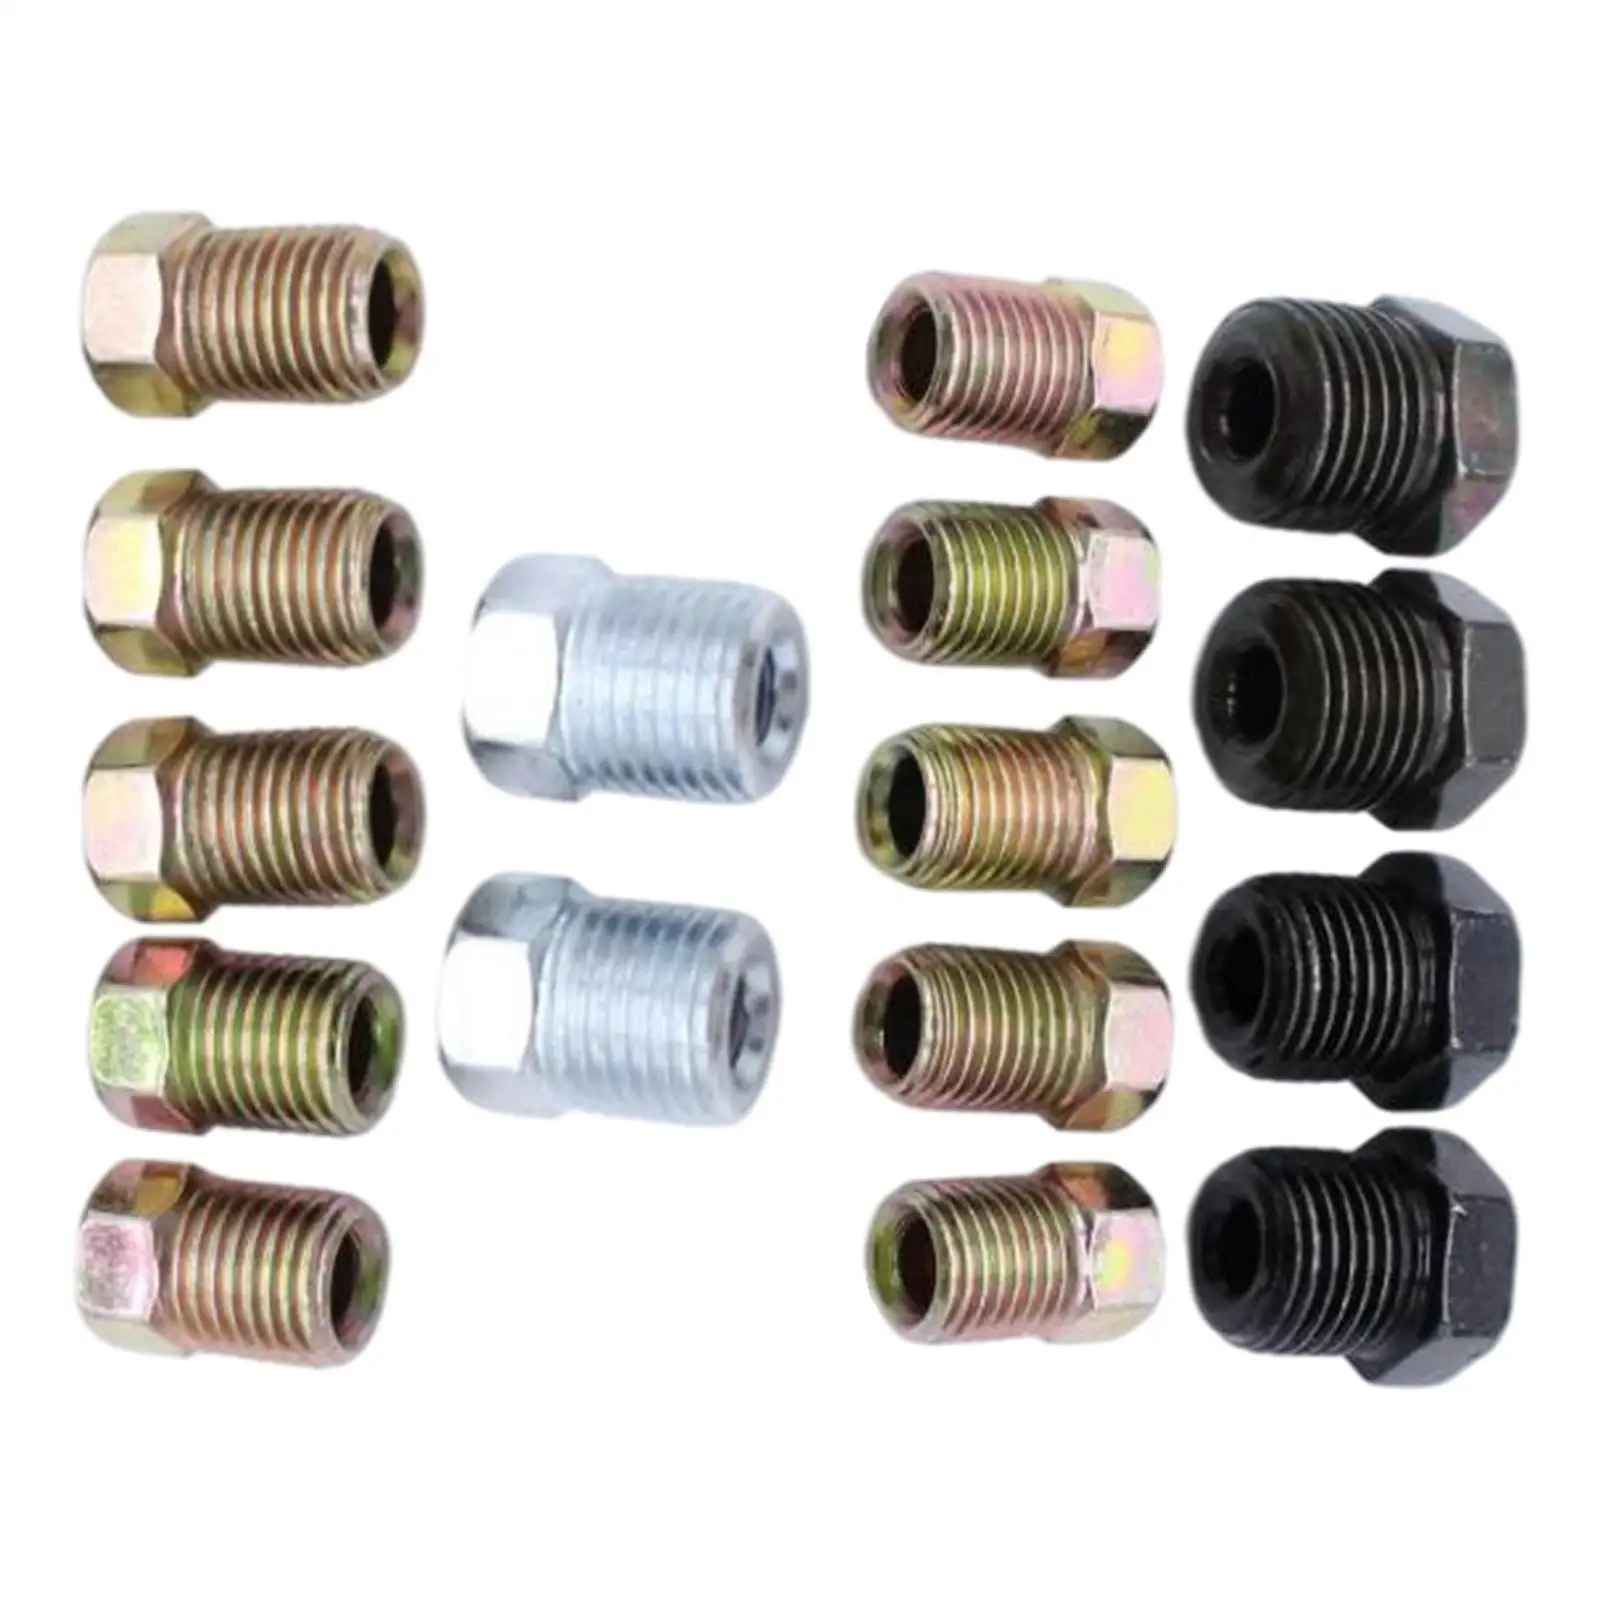 16-Pack Inverted Flare Tube Nuts 2x 7/16-24 for 3/16 Tube Accessories